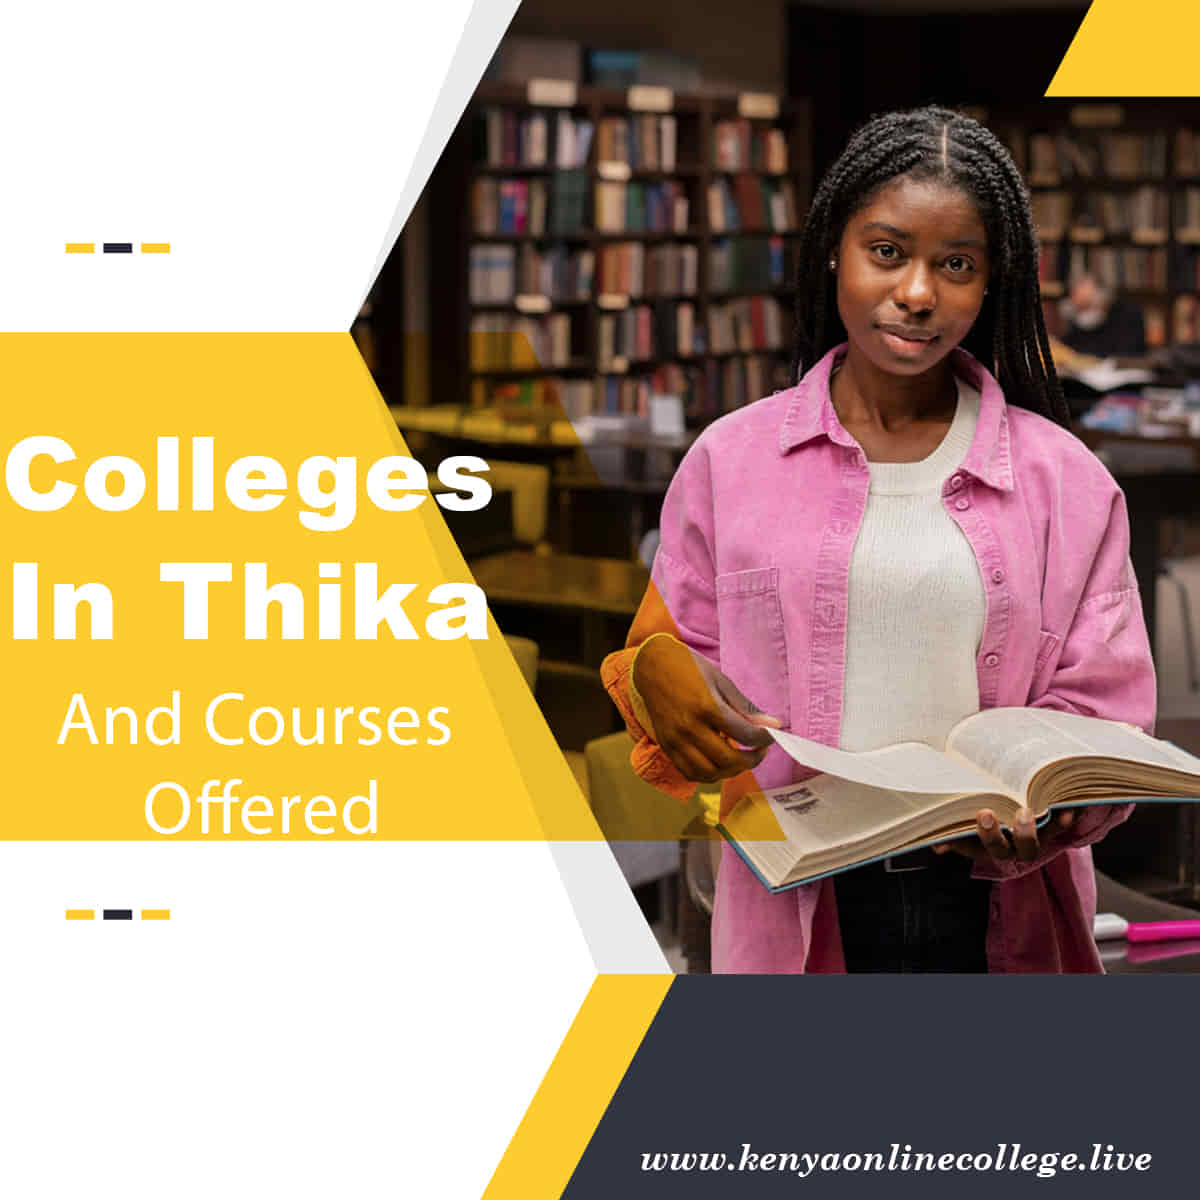 Colleges in Thika